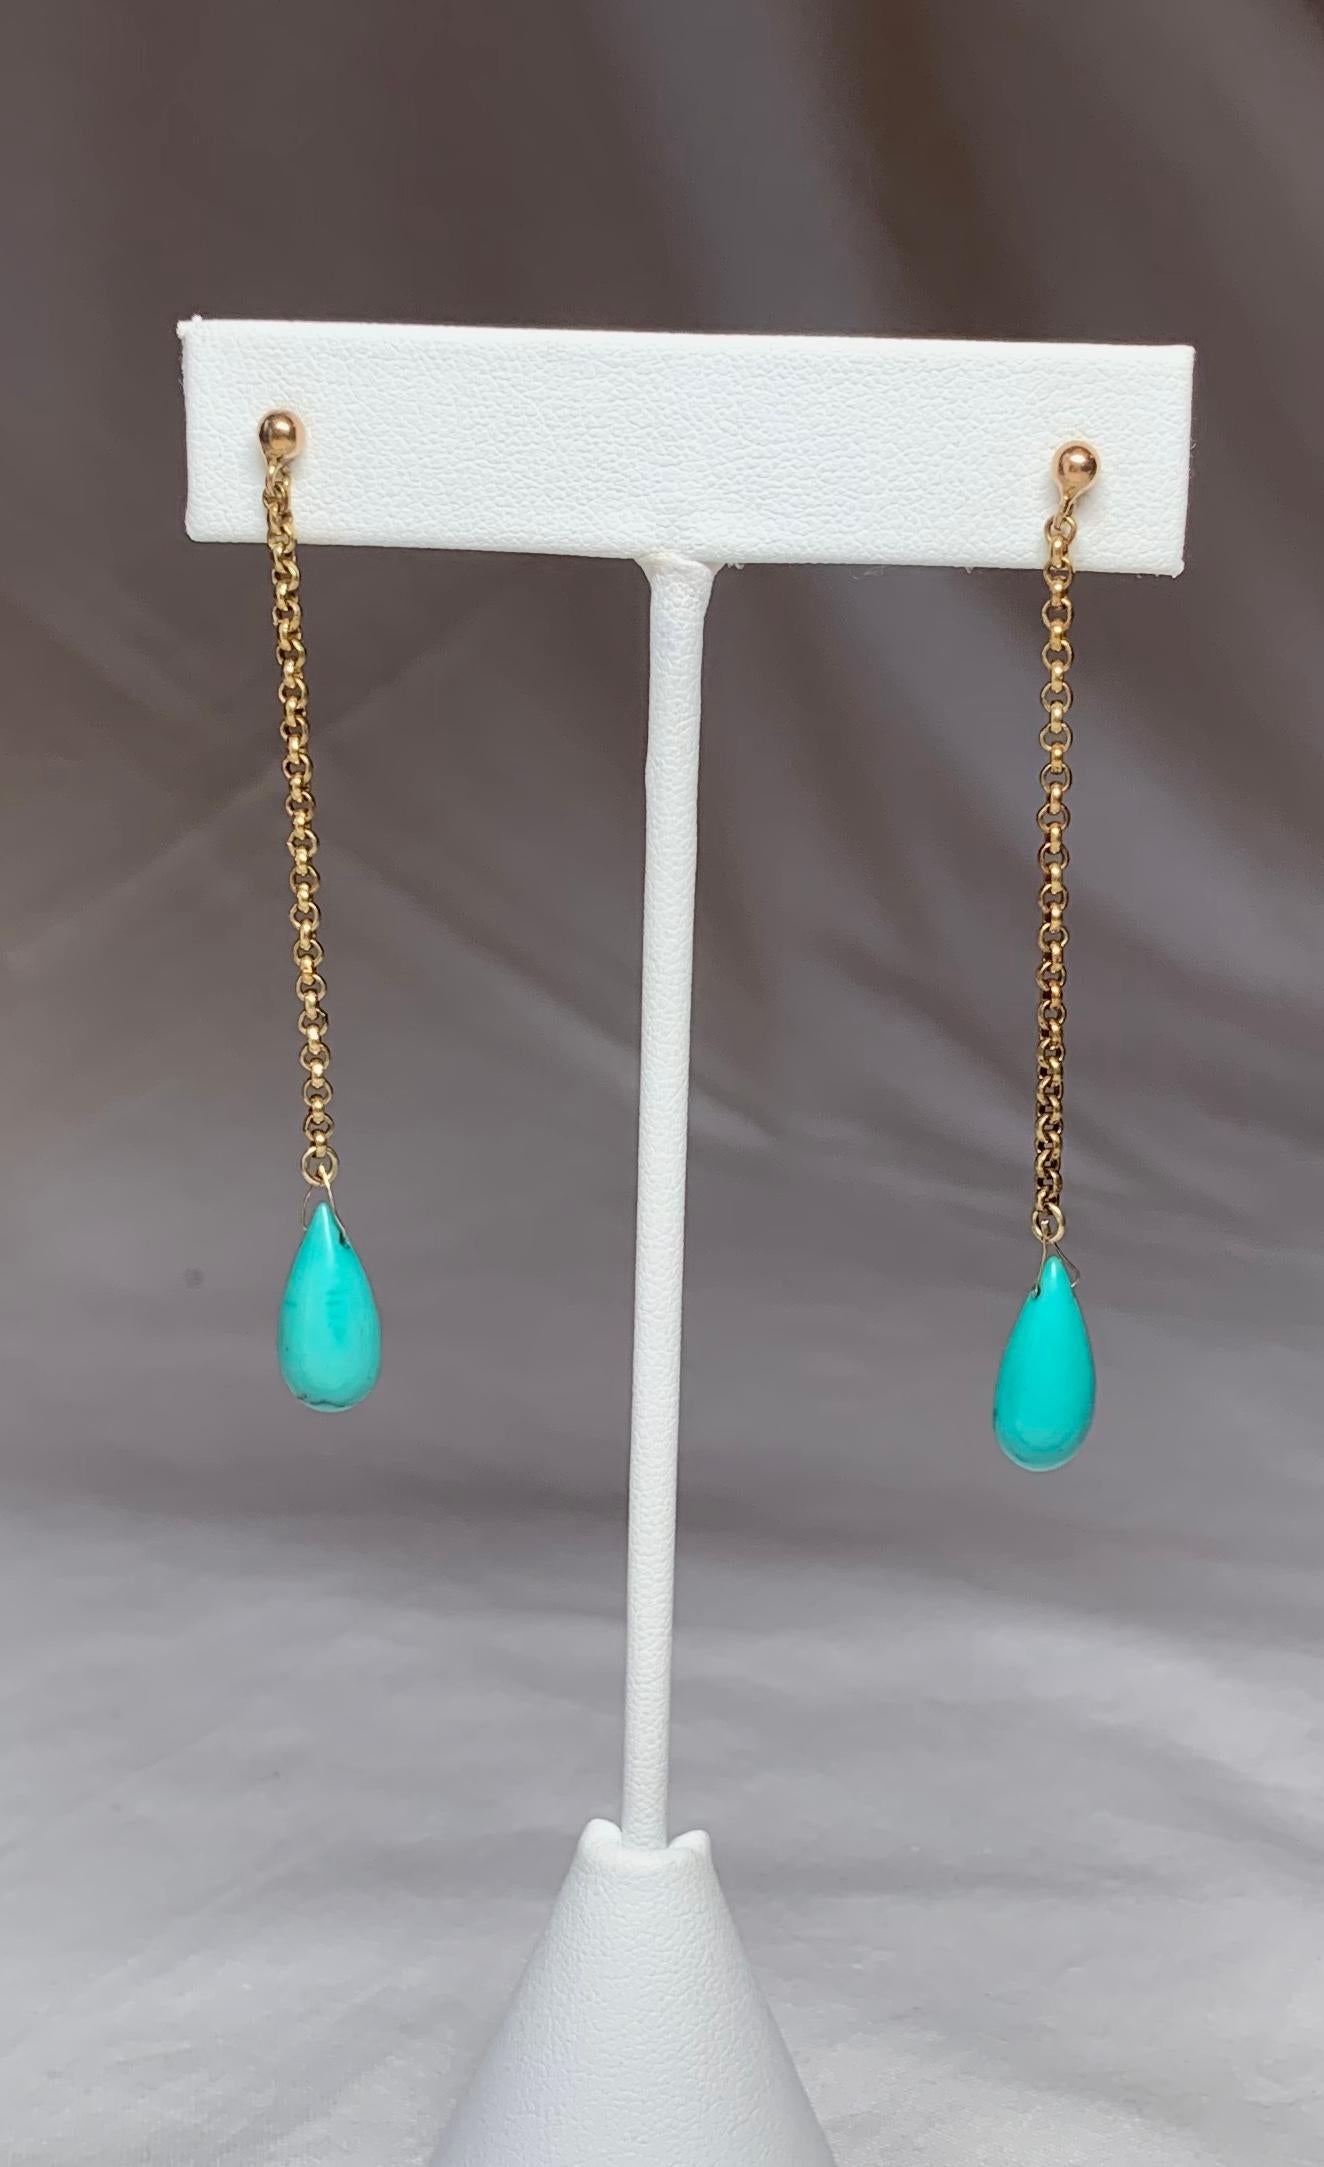 A STUNNING PAIR OF ESTATE EARRINGS WITH GORGEOUS PEAR SHAPED PERSIAN TURQUOISE GEMS IN A DRAMATIC LENGTH OF 2.75 INCHES.  THE TURQUOISE IS AN INCREDIBLE COLOR.  THE GOLD IS 9K ROSE GOLD.  A WONDERFUL FUN ROMANTIC PAIR.
The earrings are in excellent